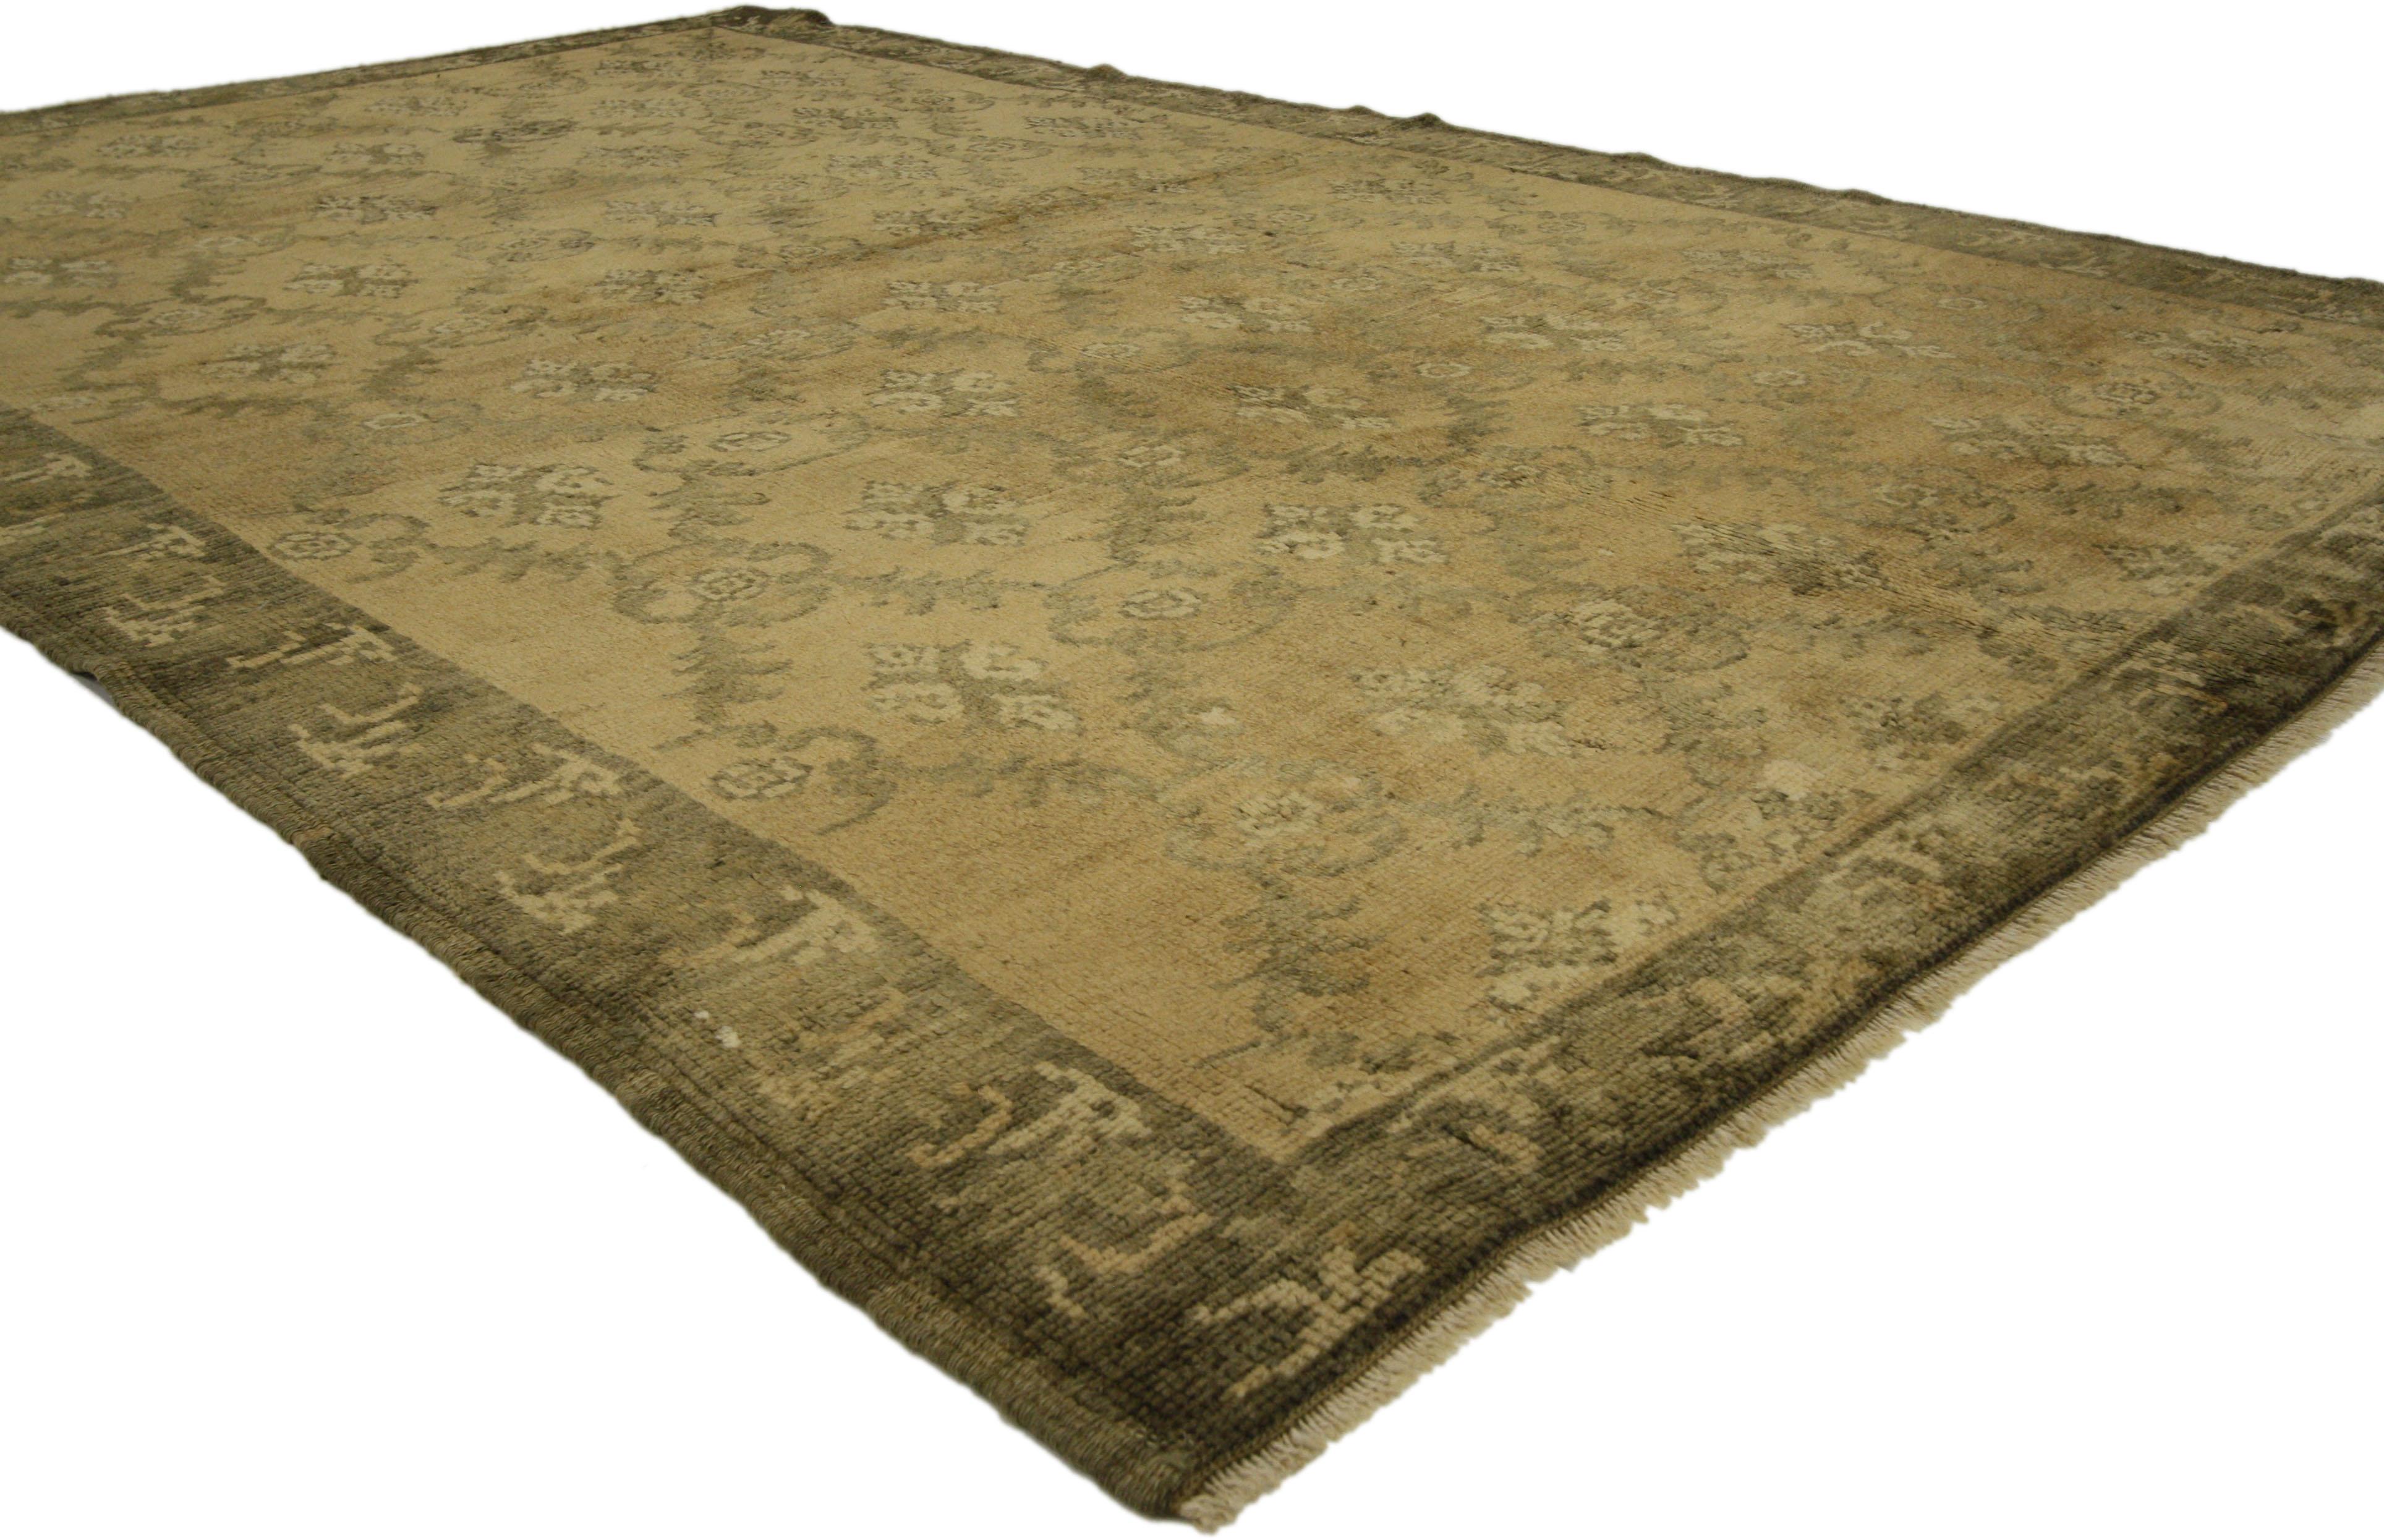 73634, vintage Turkish Oushak rug with Empire Regency style and golden colors. This hand knotted wool vintage Turkish Oushak rug features a dynamic all-over Mina Khani pattern spread across an abrashed camel field. Derived from 16th century Persian